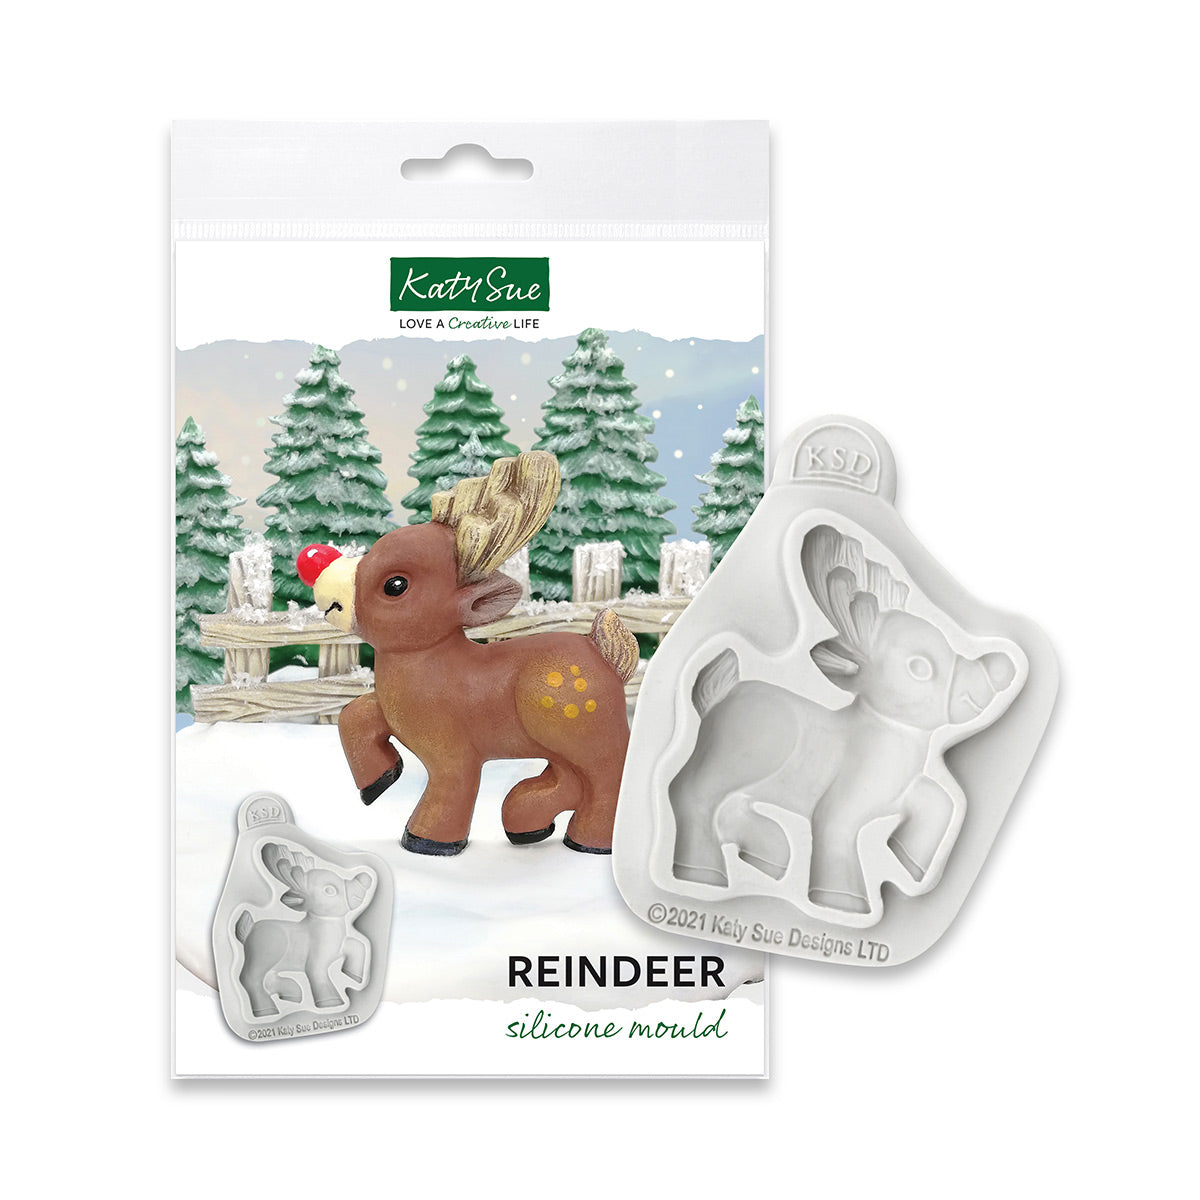 C&D Reindeer Silicone Mould